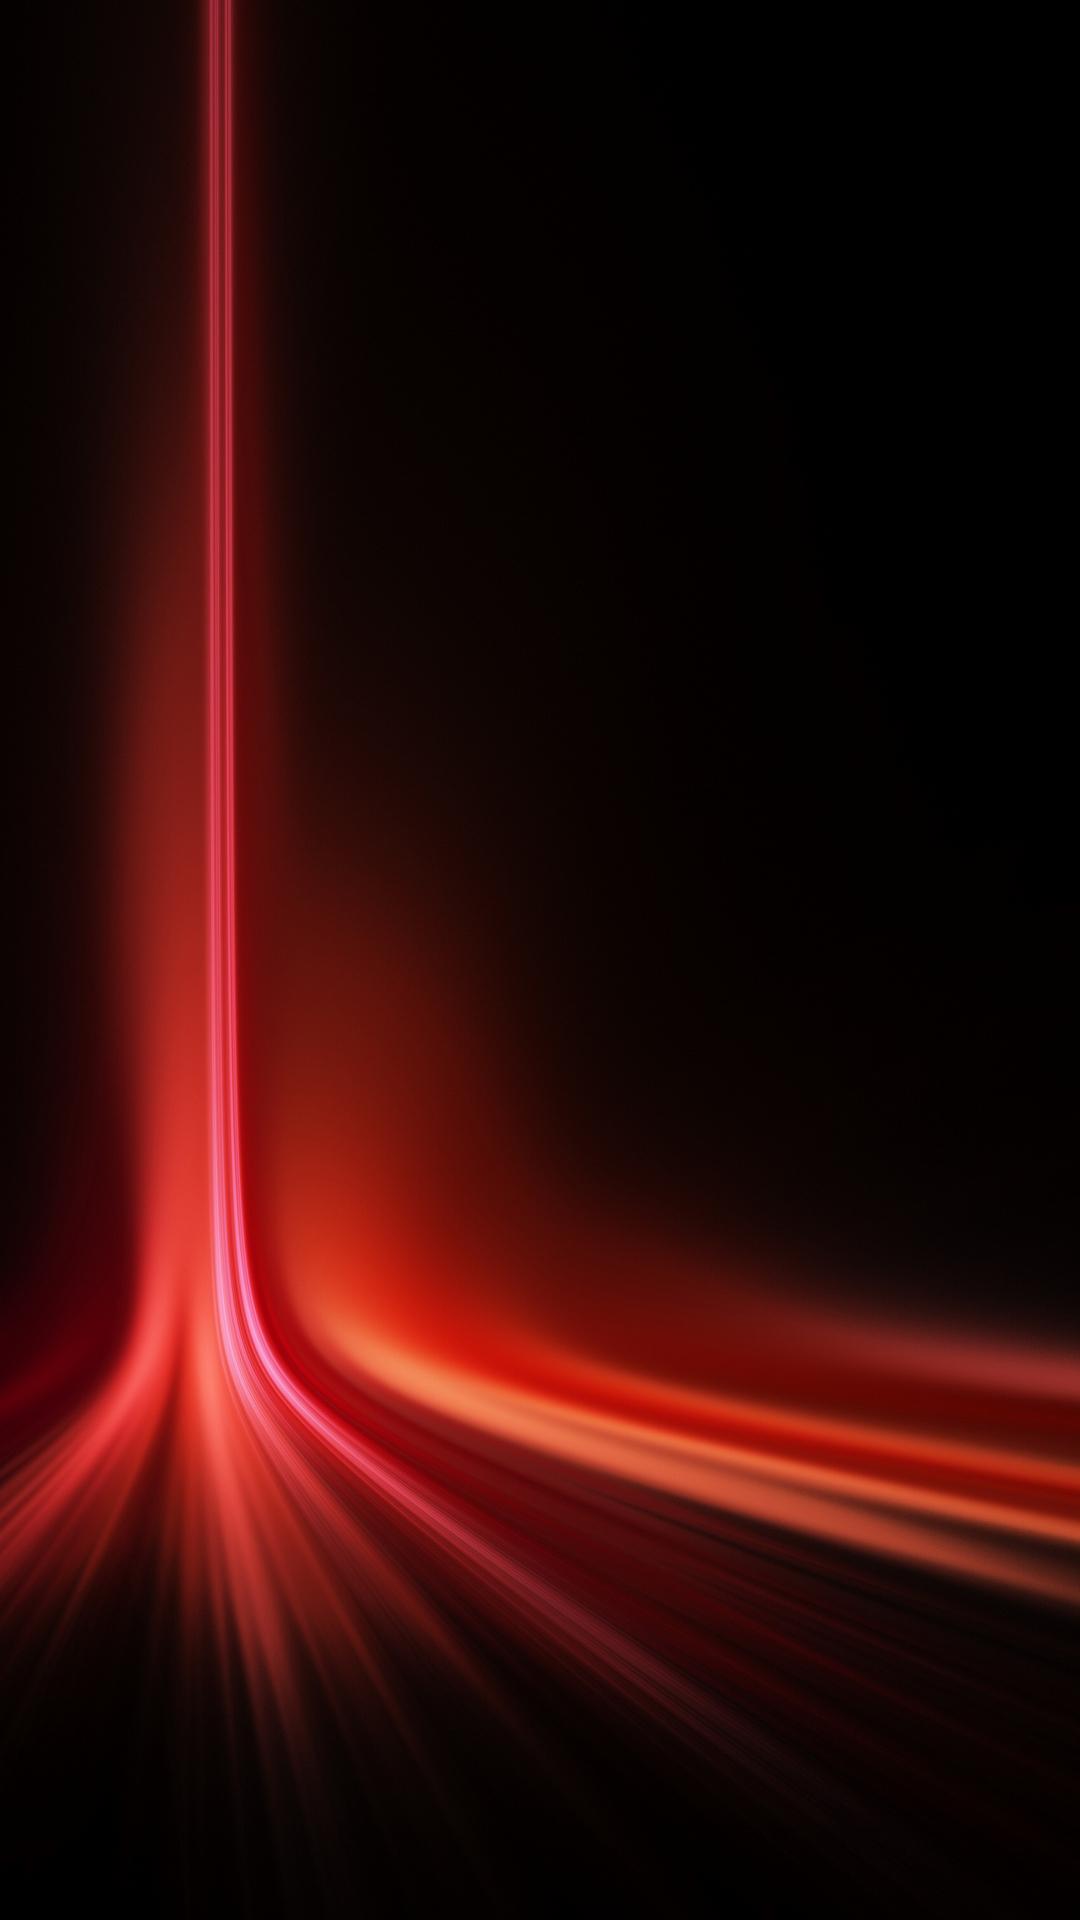 Free download Vertical Red Laser Light Spread Android